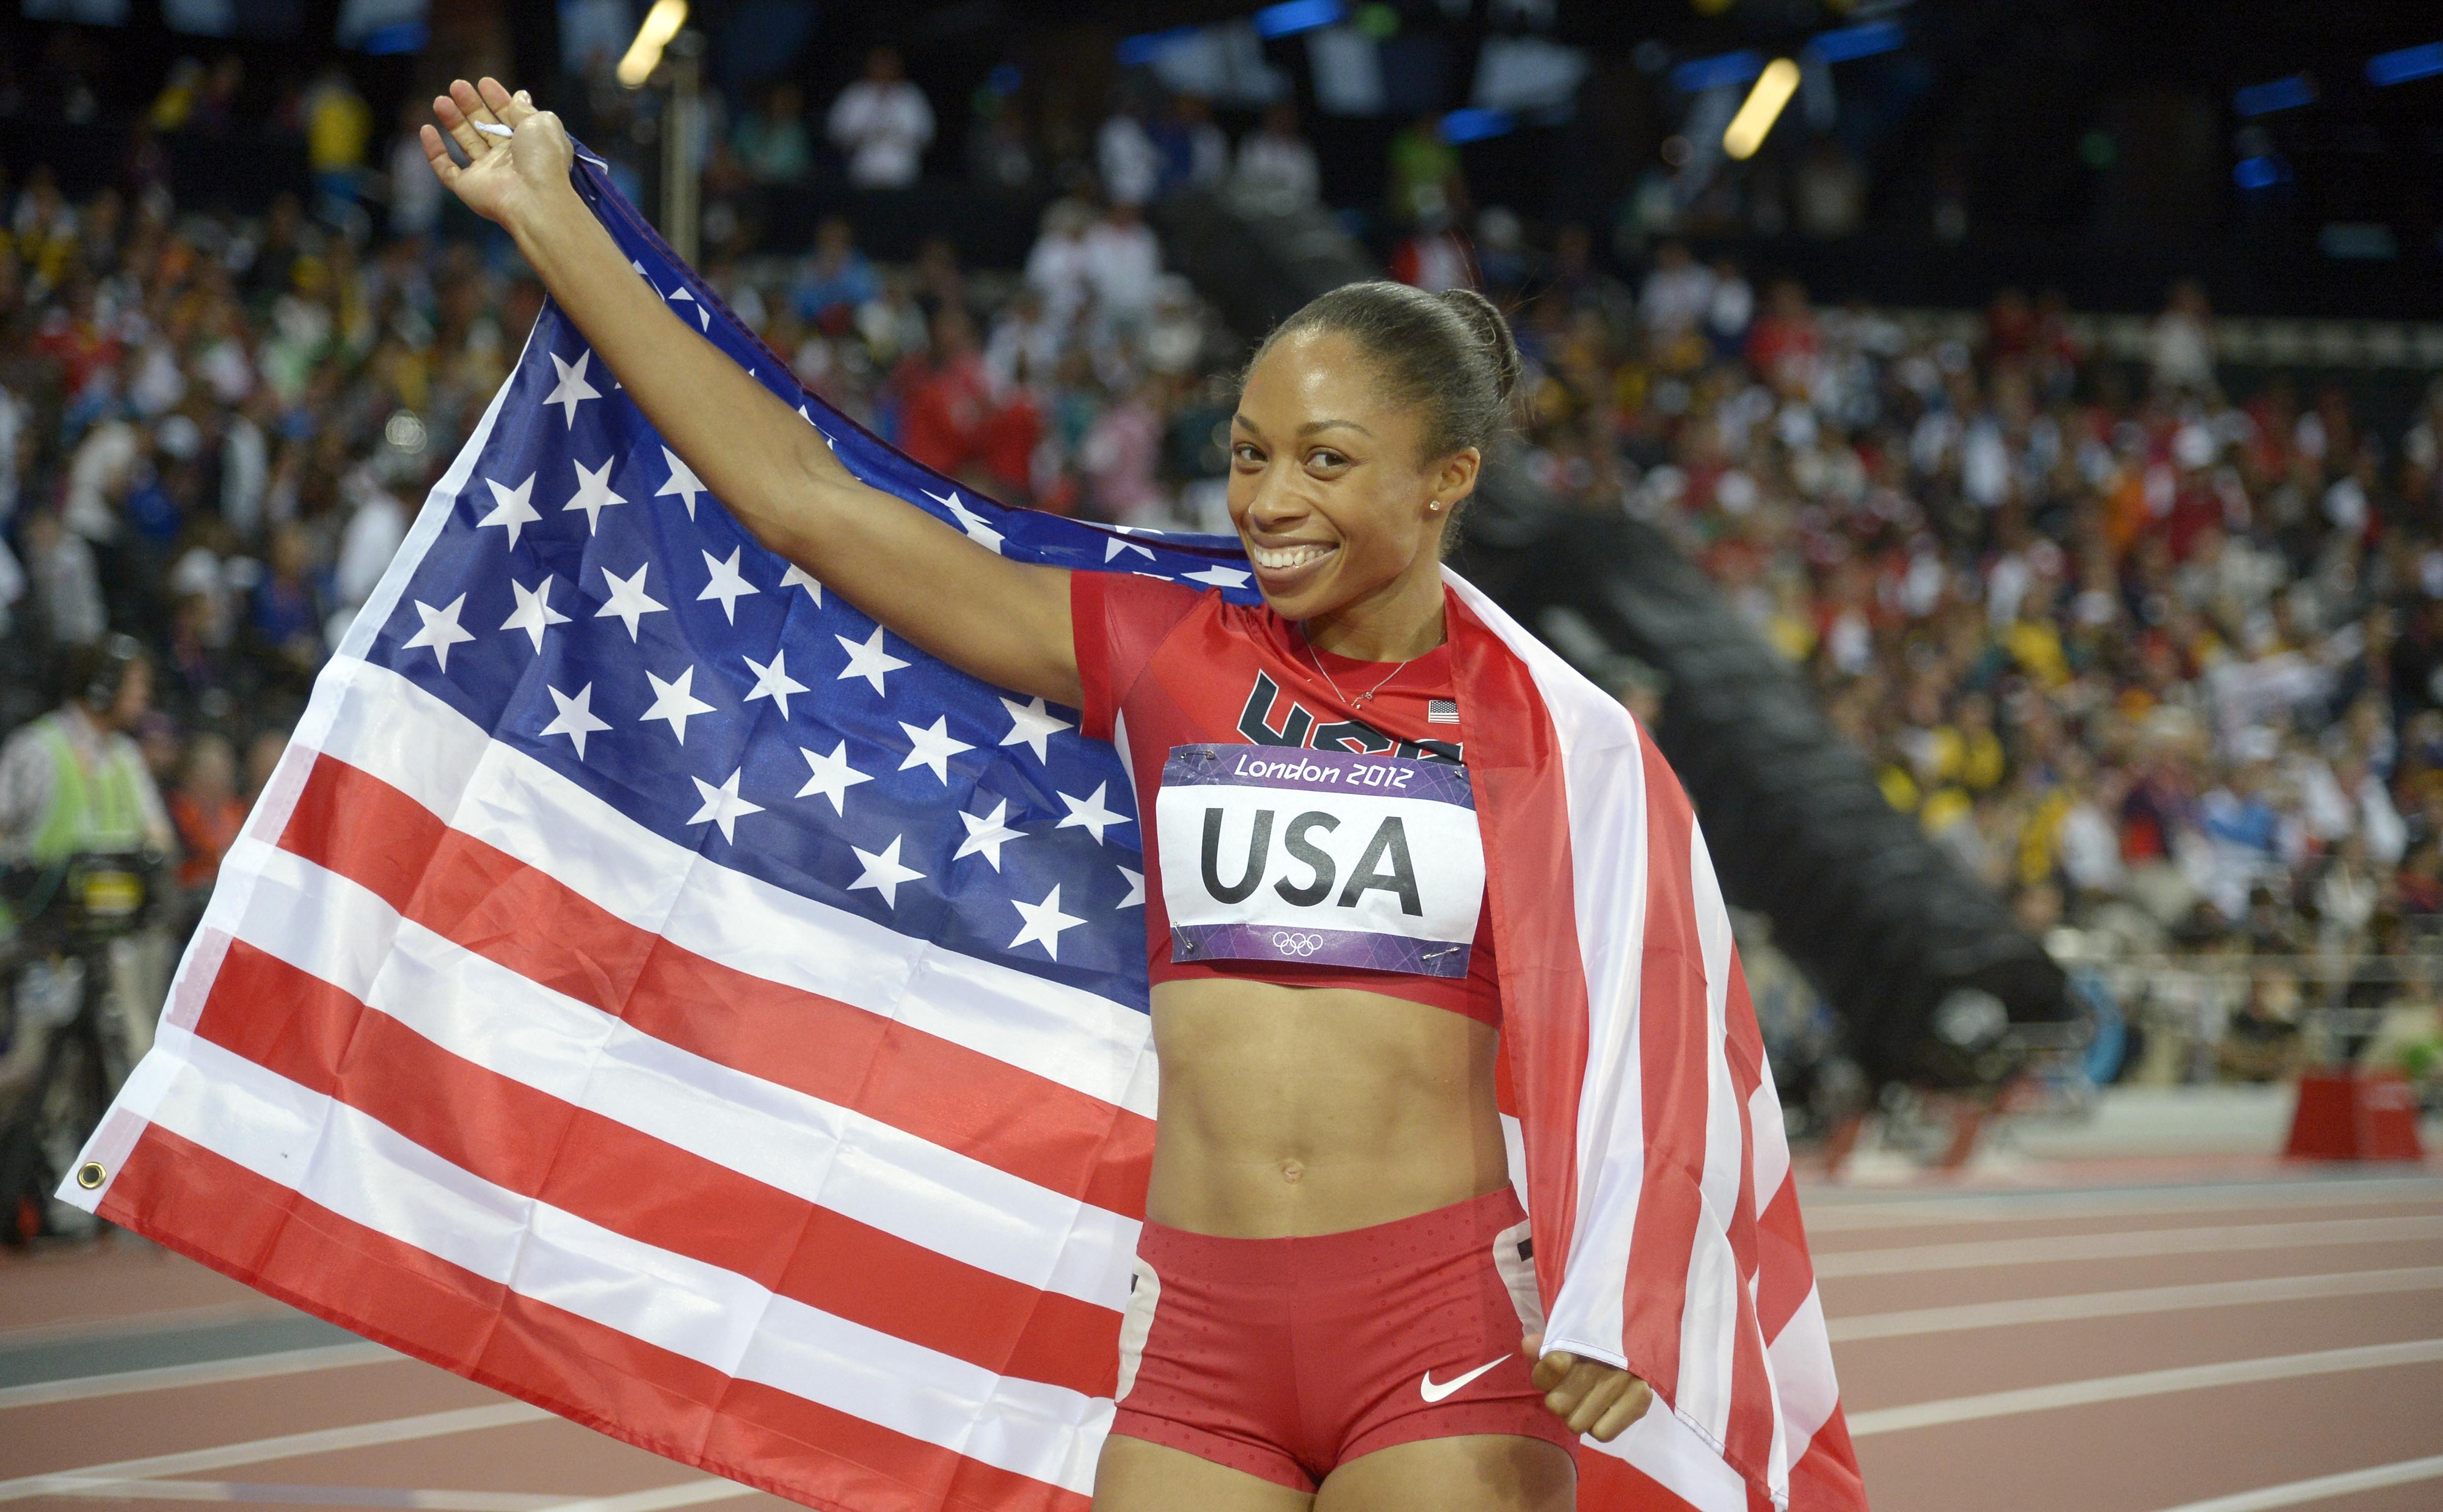 Aug 11, 2012; London, United Kingdom; Allyson Felix (USA) celebrates with an American flag after winning the women's 4x400m relay final during the 2012 London Olympic Games at Olympic Stadium. Mandatory Credit: Kirby Lee-USA TODAY Sports